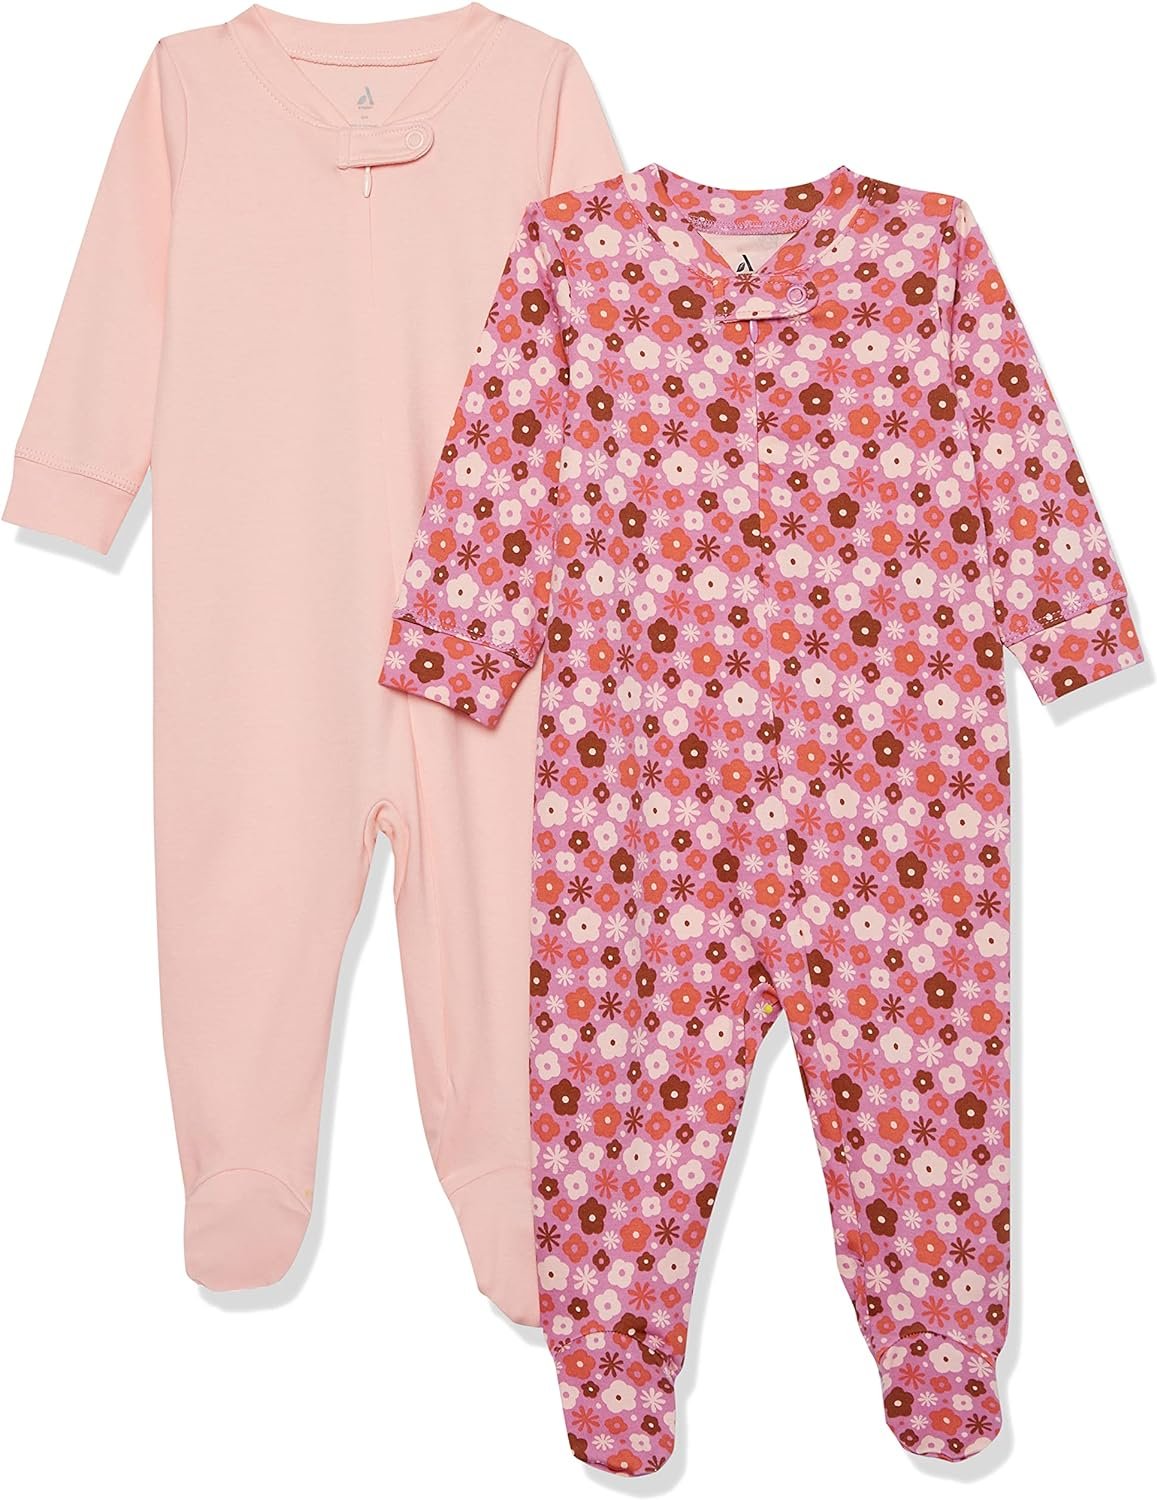 Amazon Aware Unisex Babies’ Organic Cotton Footed Sleep and Play Review